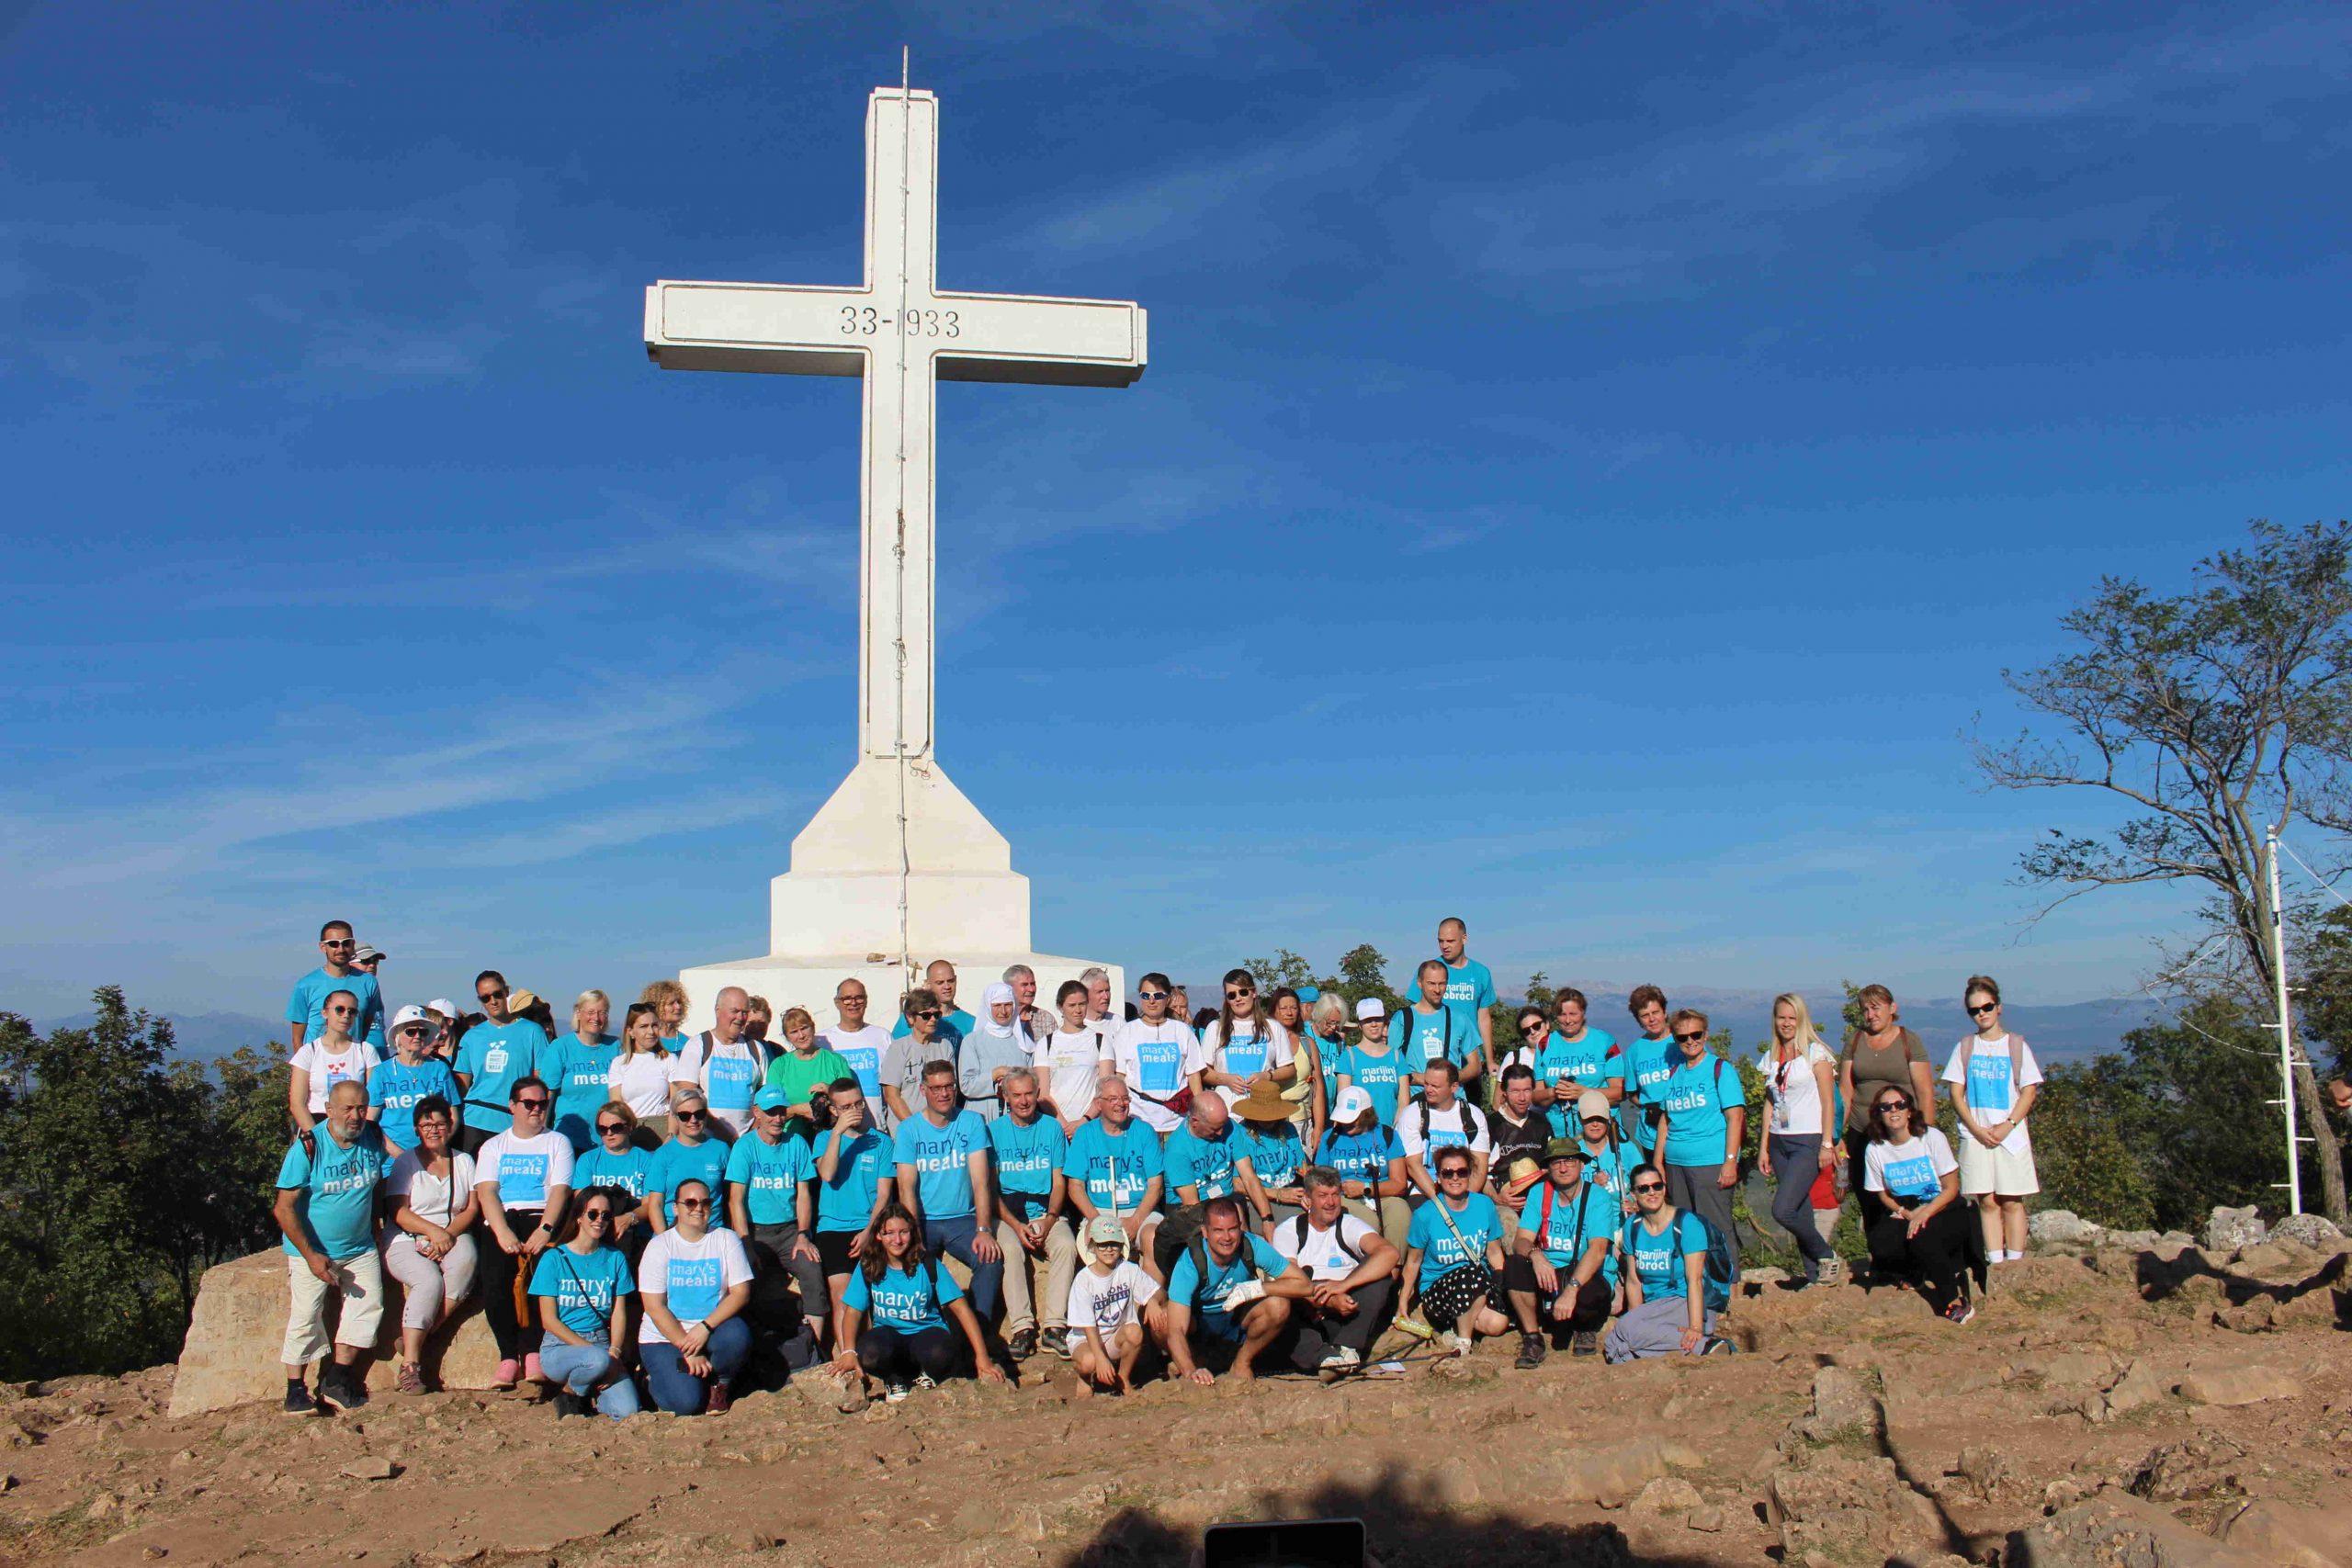 A Time of Grace: Mary’s Meals gathers from 6-8th October 2023 for Annual Family Pilgrimage